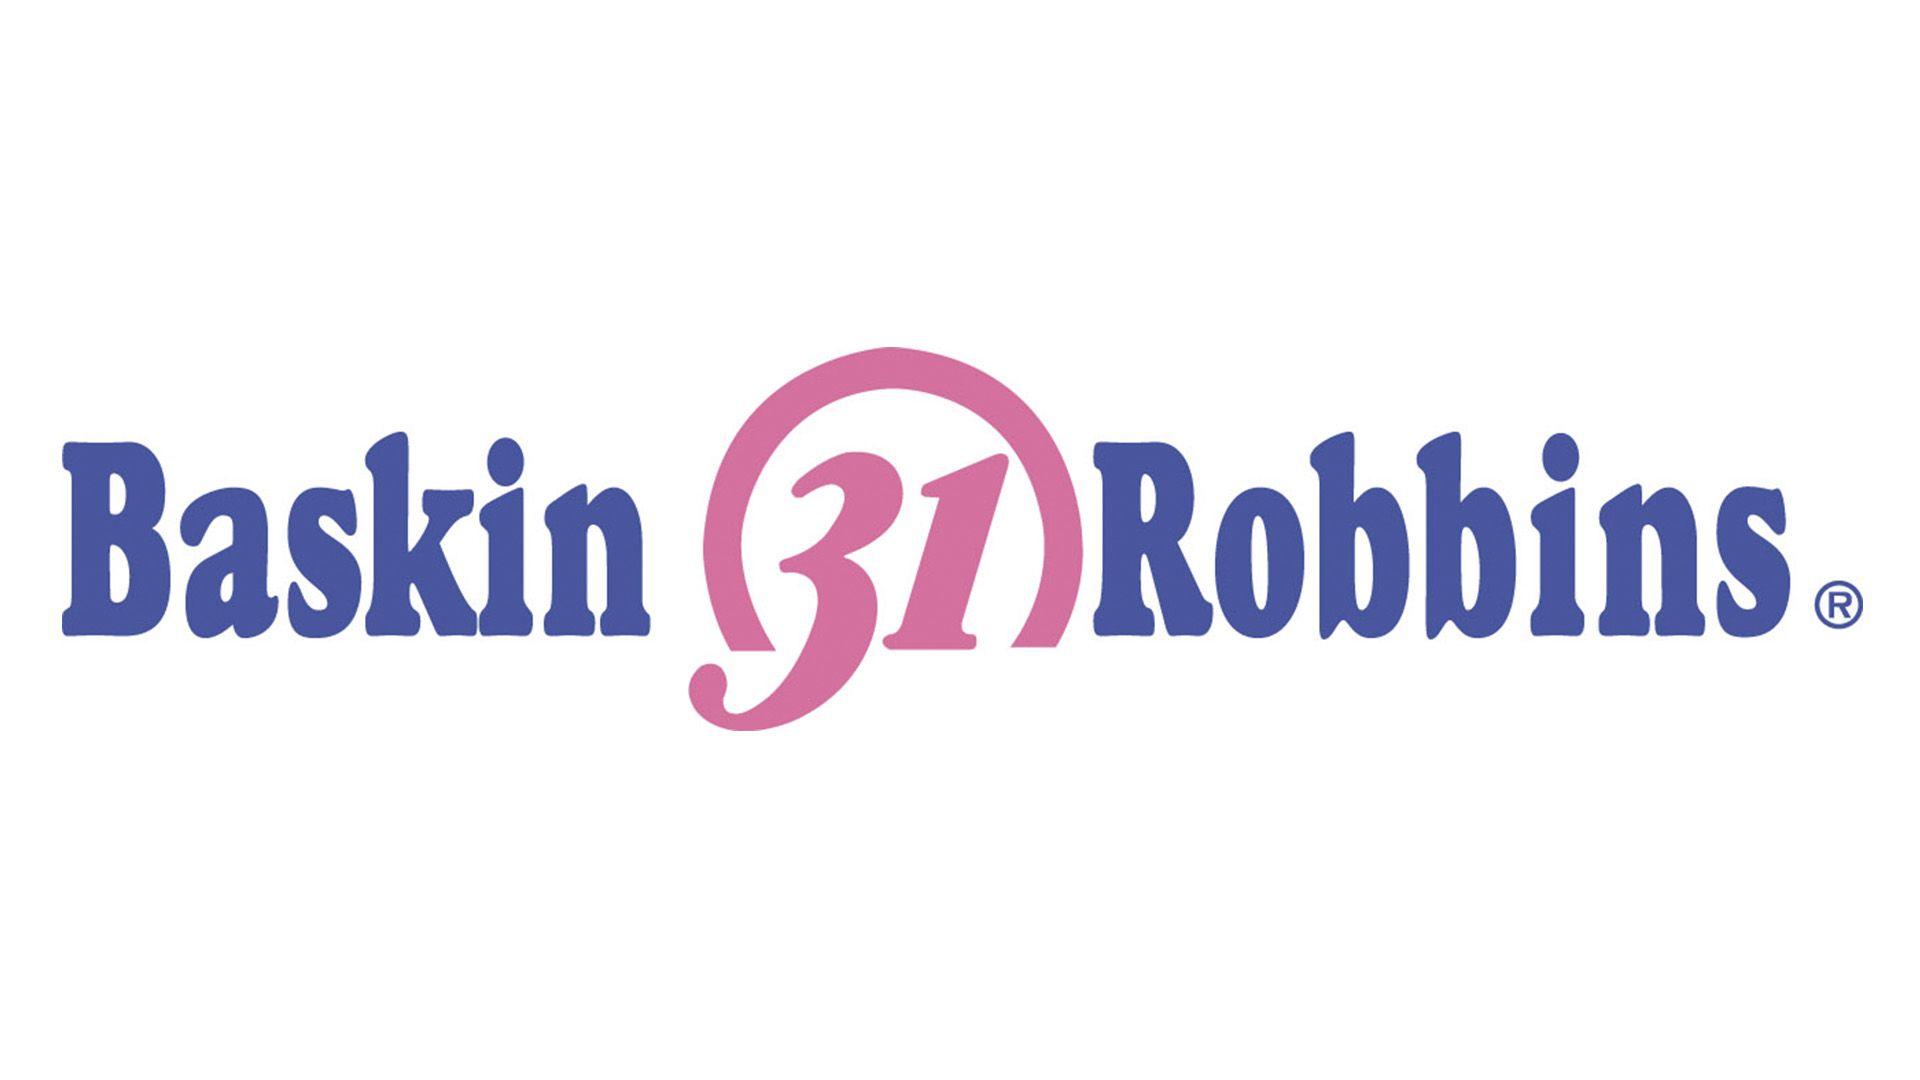 Old Baskin Robbins Logo - Baskin Robbins Logo, Baskin Robbins Symbol Meaning, History and ...